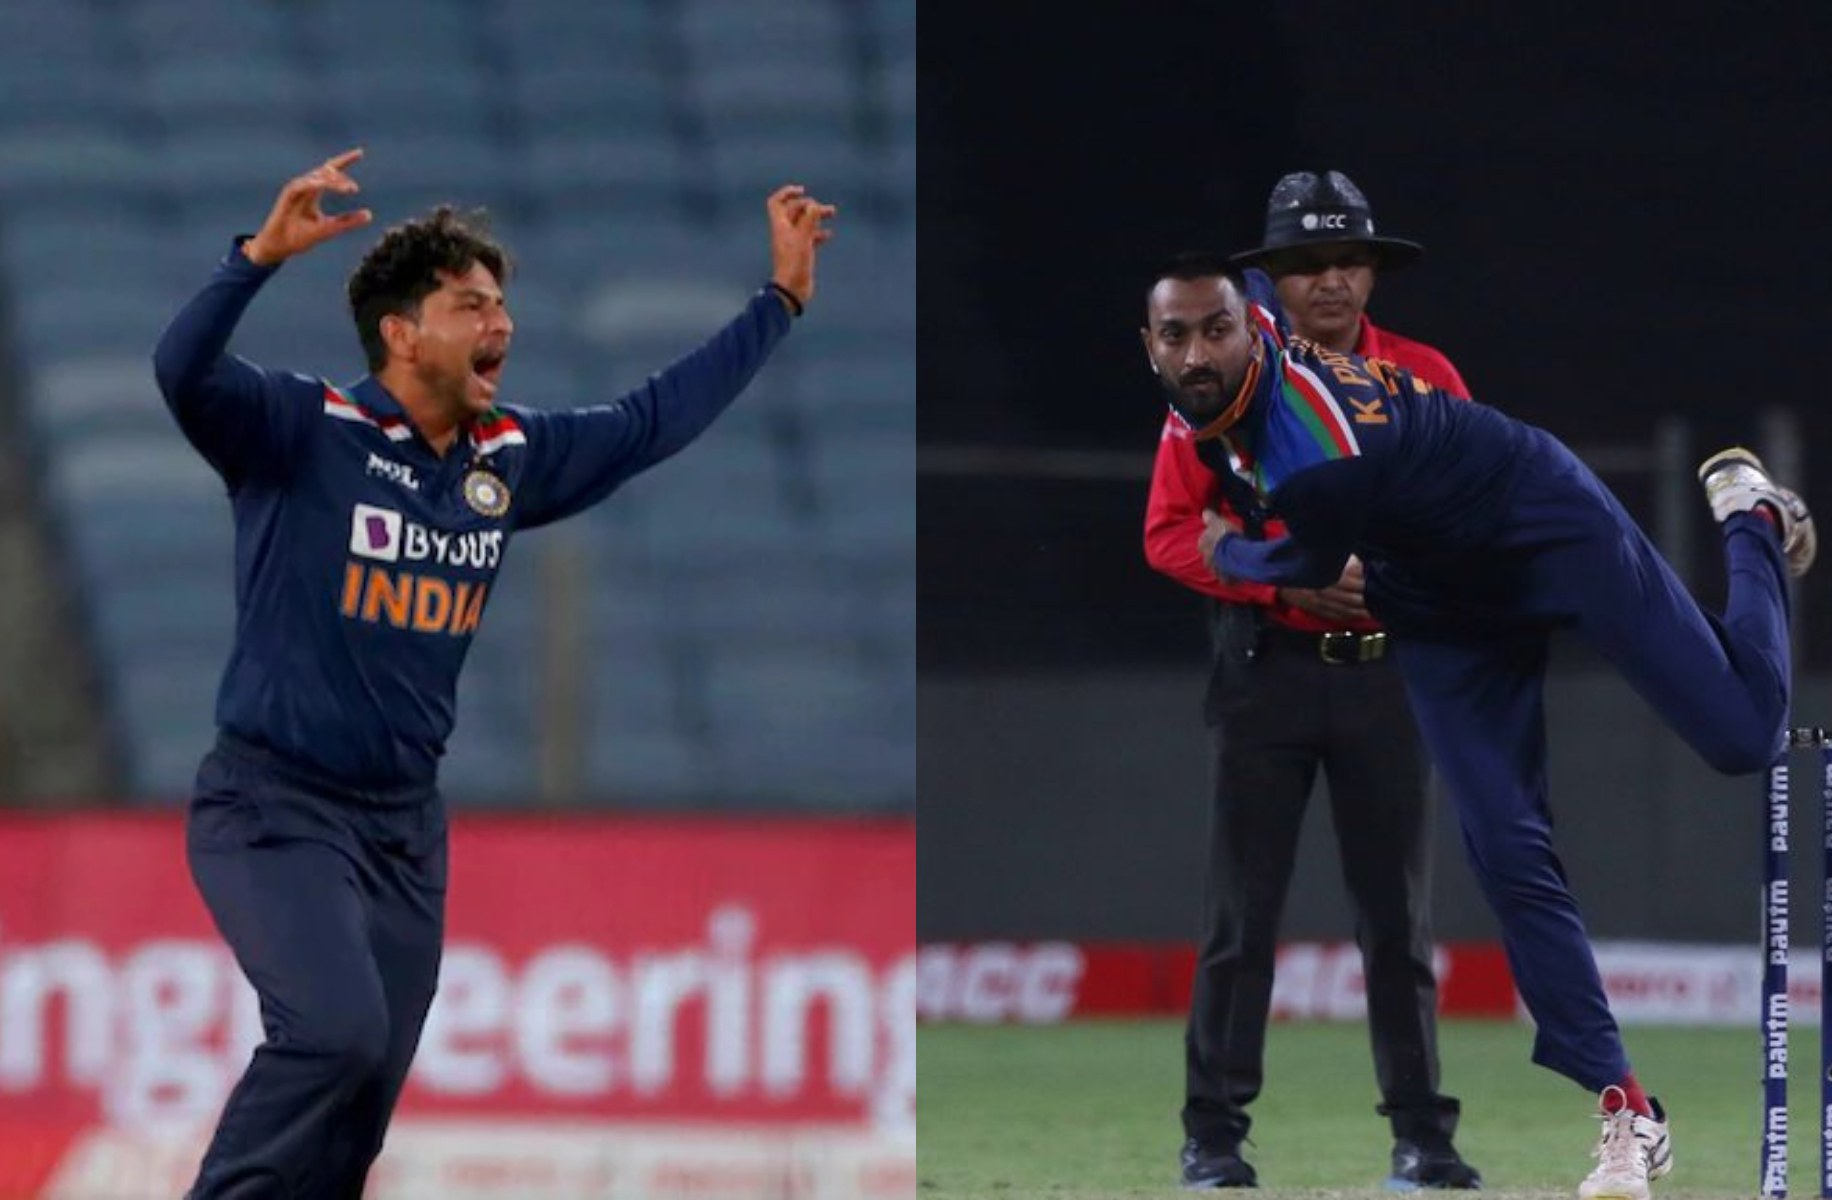 Kuldeep Yadav and Krunal Pandya managed just 1 wicket in 2 ODIs they played together | BCCI